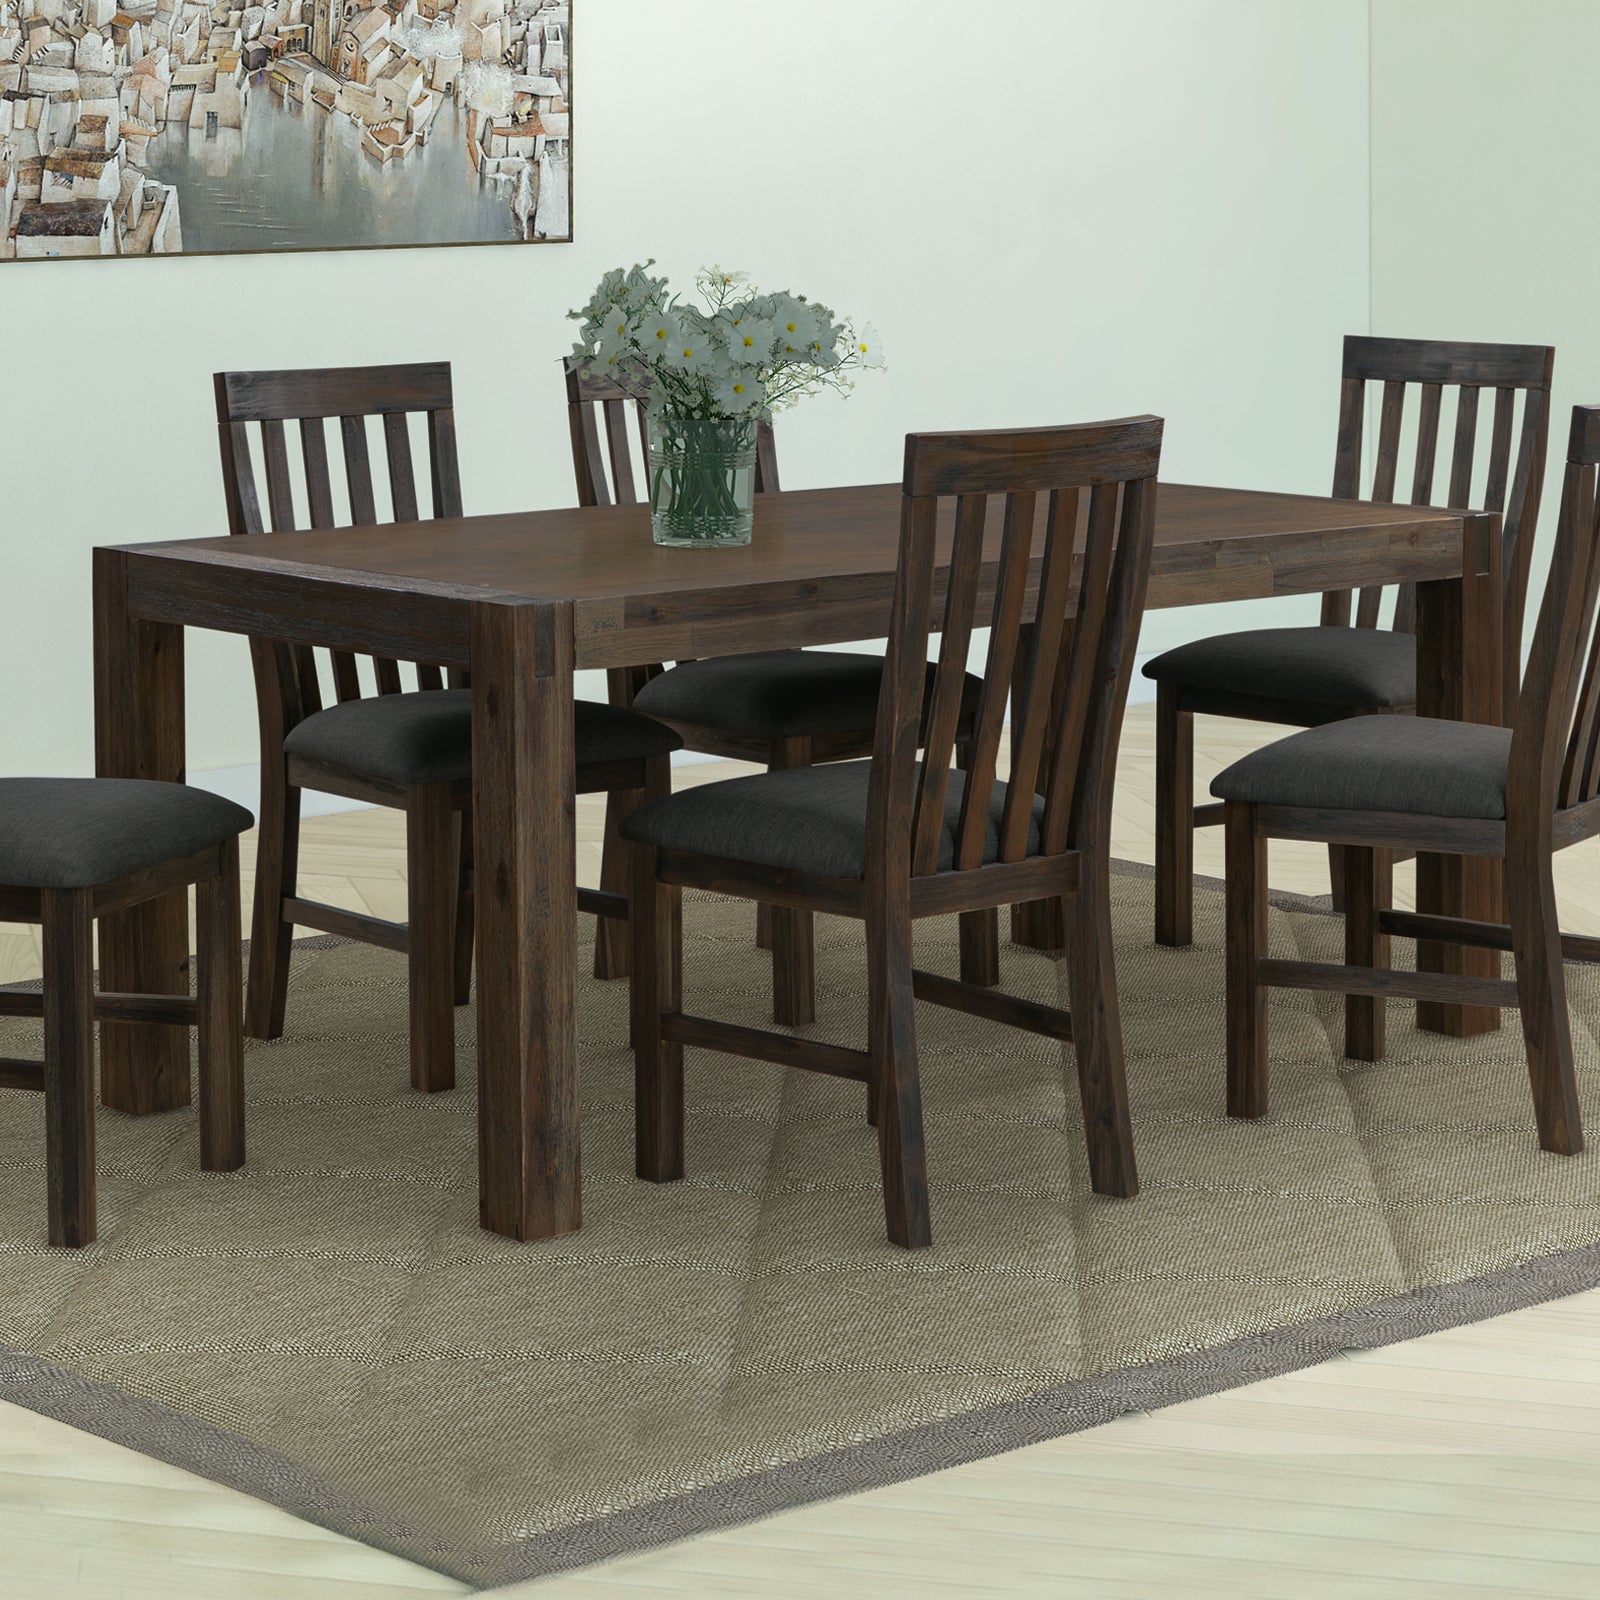 Dining Table 180cm Medium Size with Solid Acacia Wooden Base in Chocolate Colour - SILBERSHELL